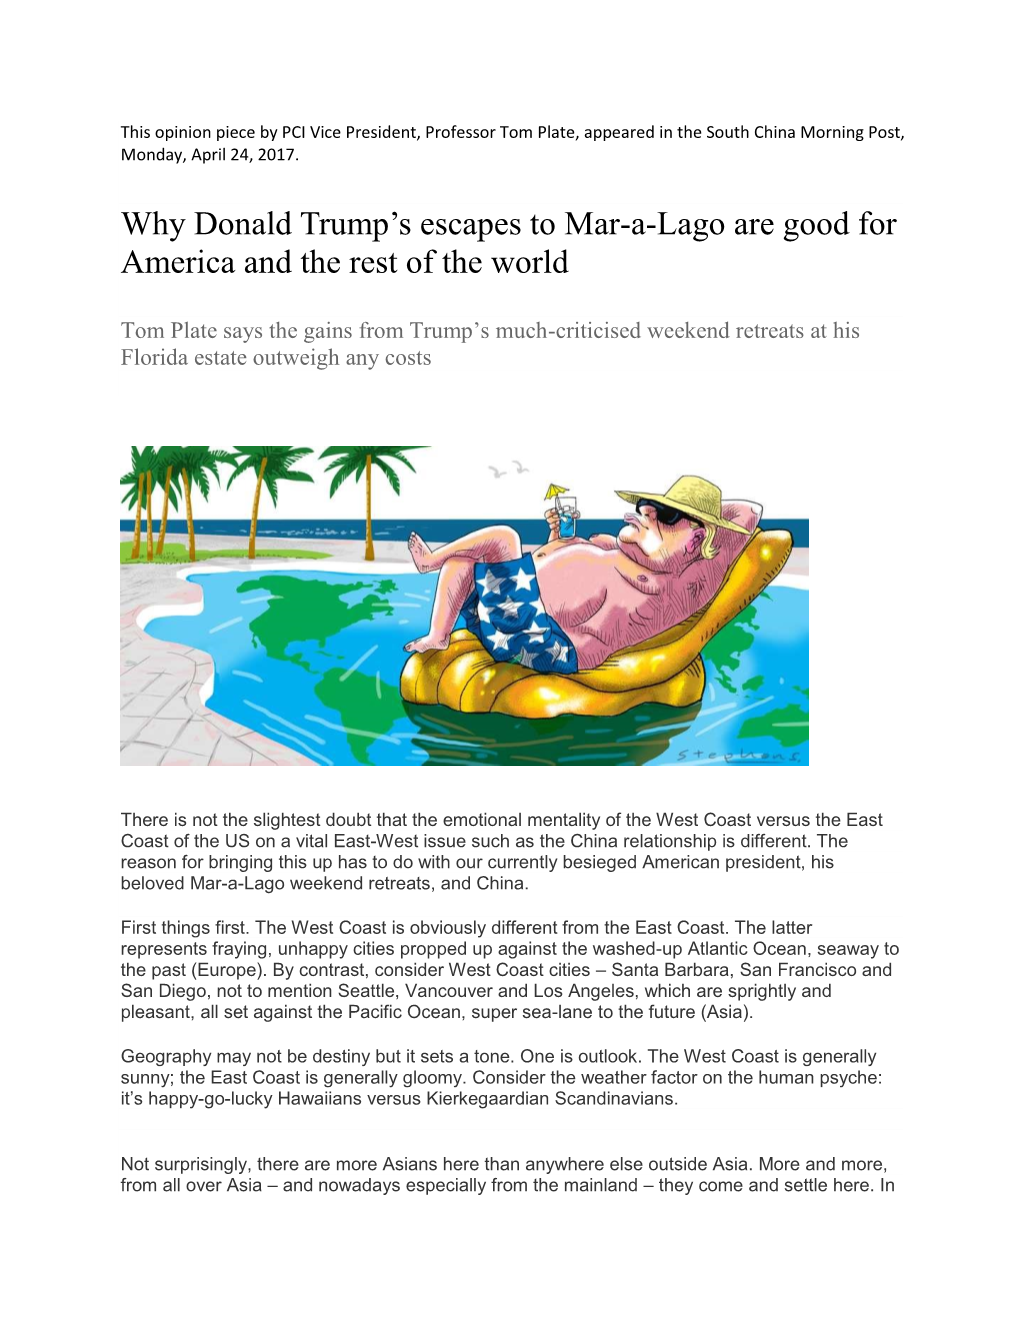 Why Donald Trump's Escapes to Mar-A-Lago Are Good for America